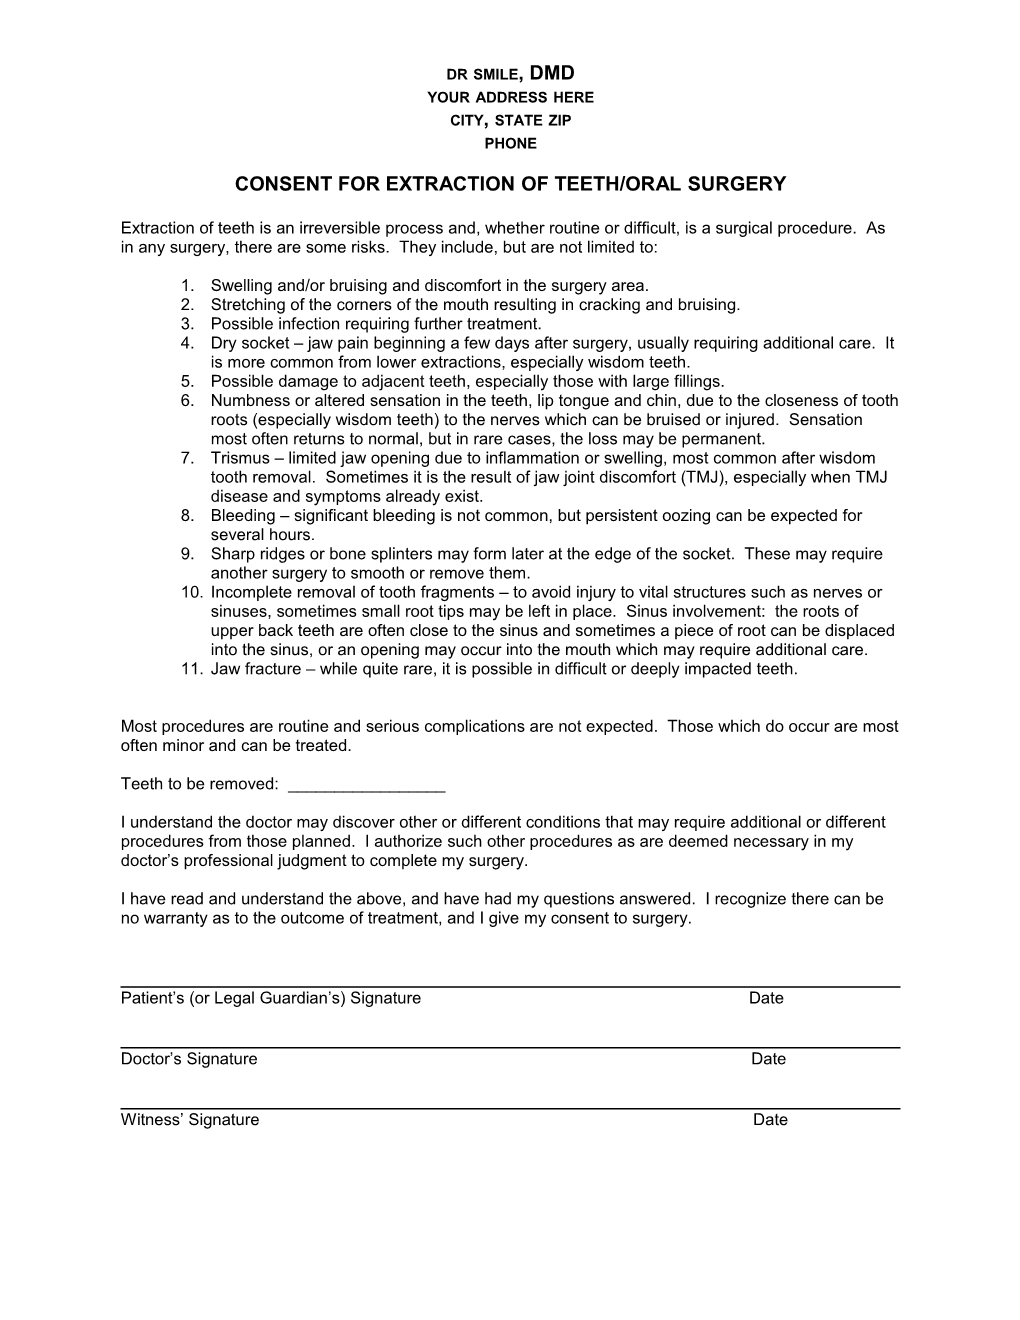 Consent for Extraction of Teeth/Oral Surgery